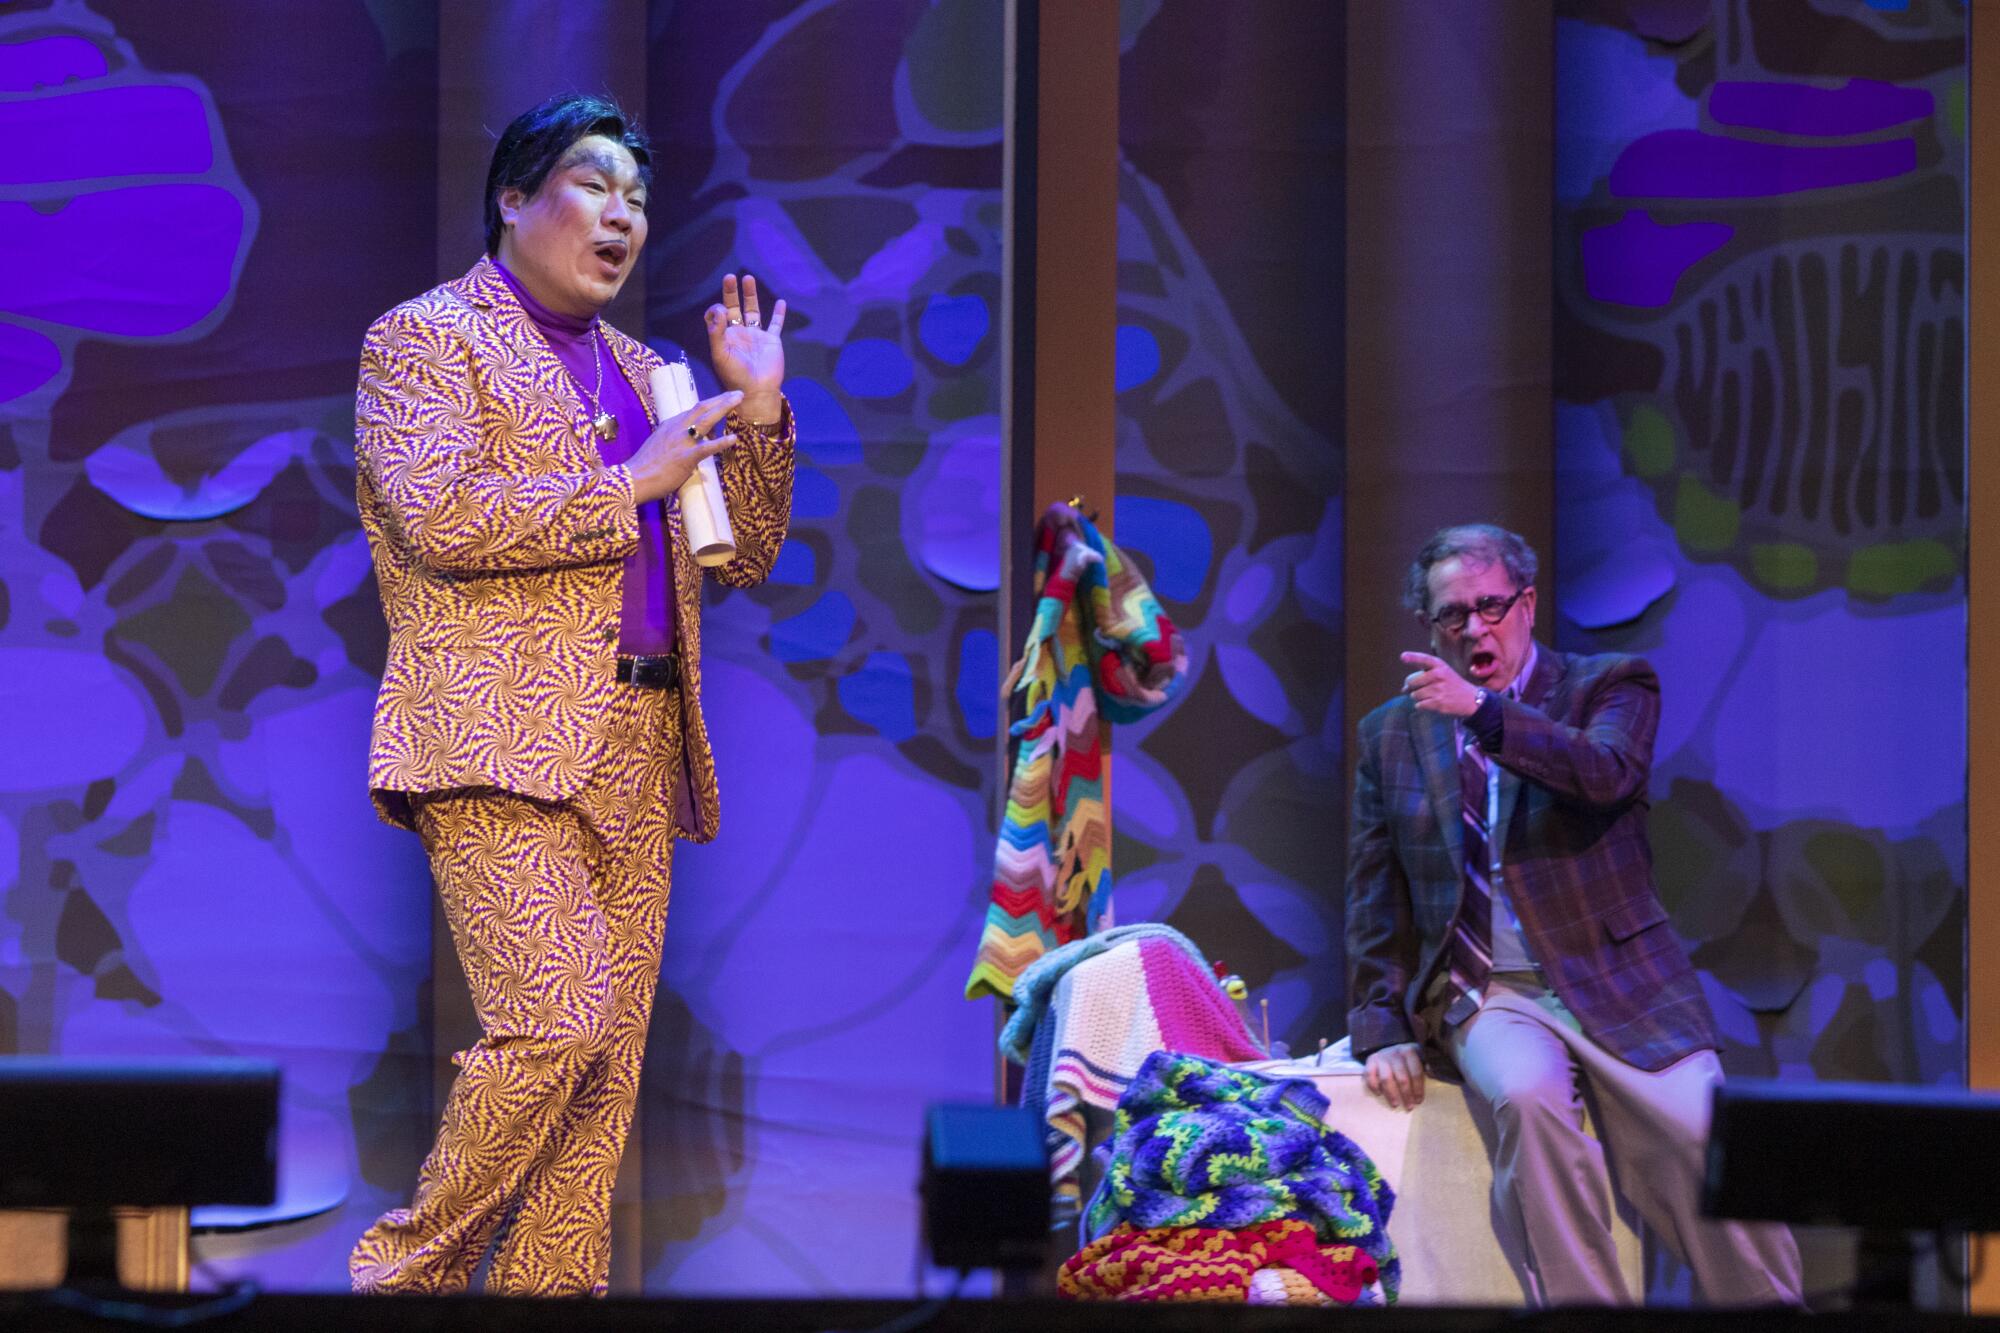 San Diego Opera's "The Barber of Seville."